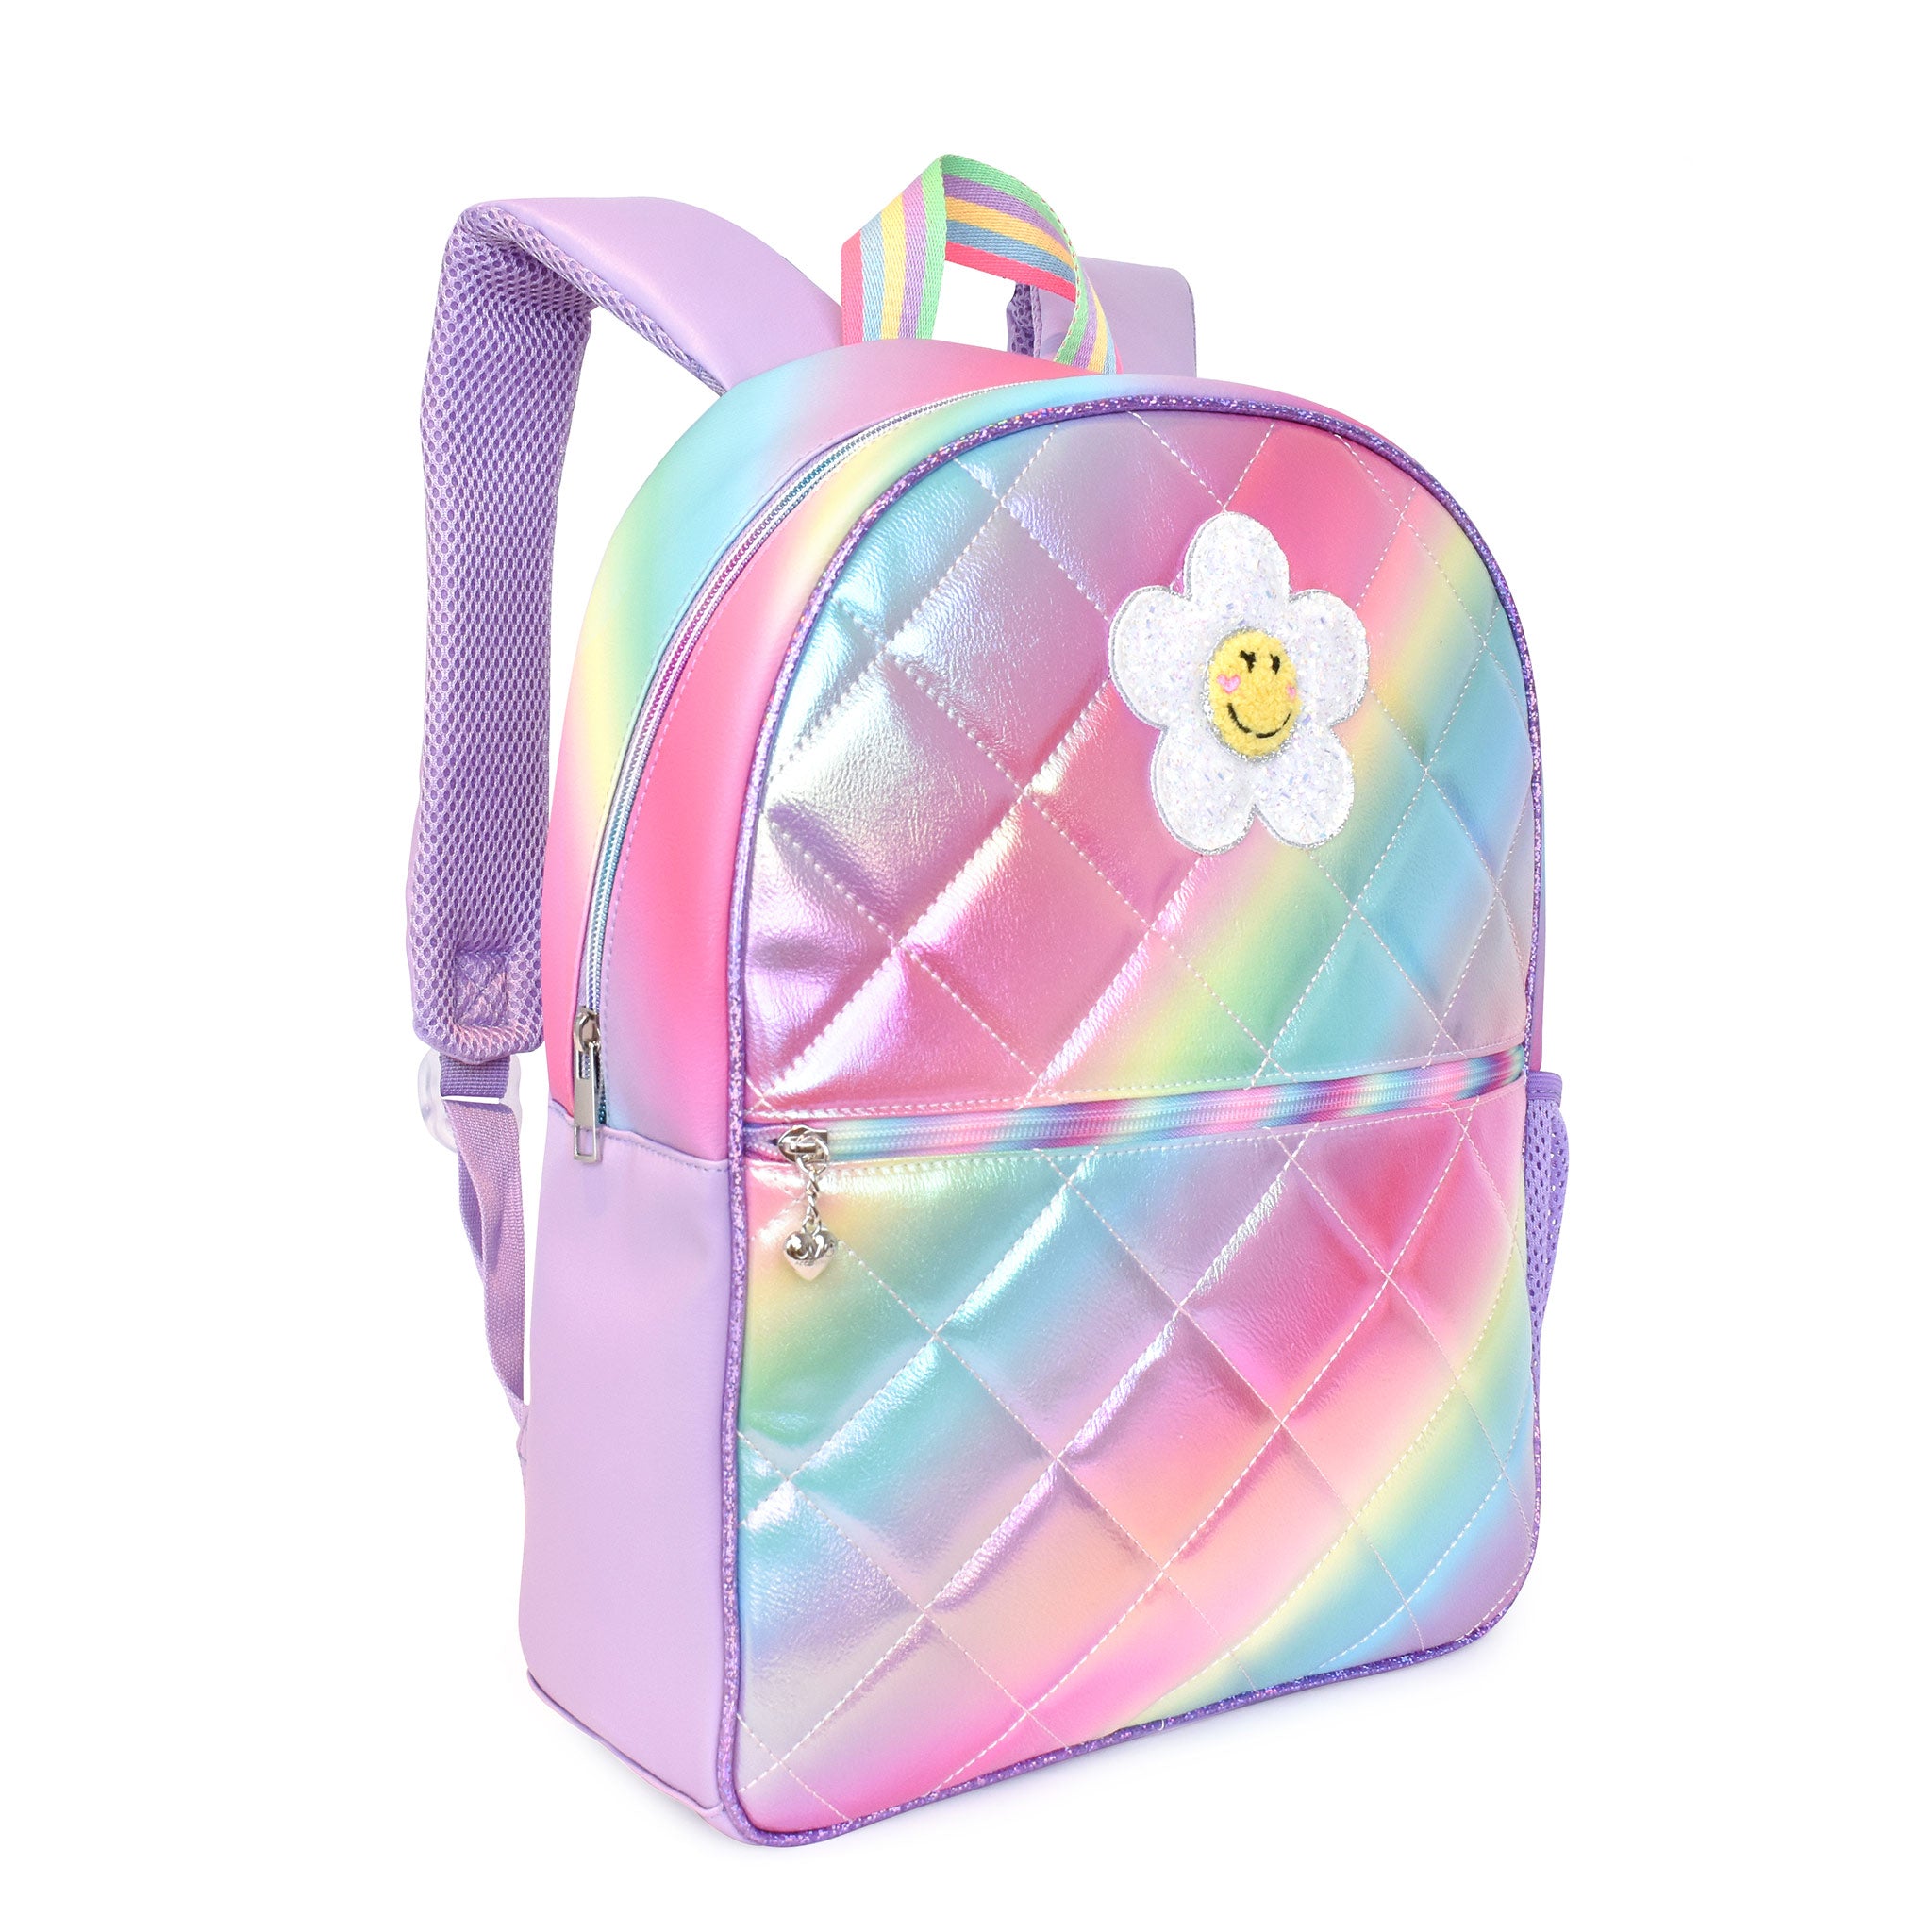 Side view of a rainbow metallic ombre quilted large backpack with a glitter daisy patch